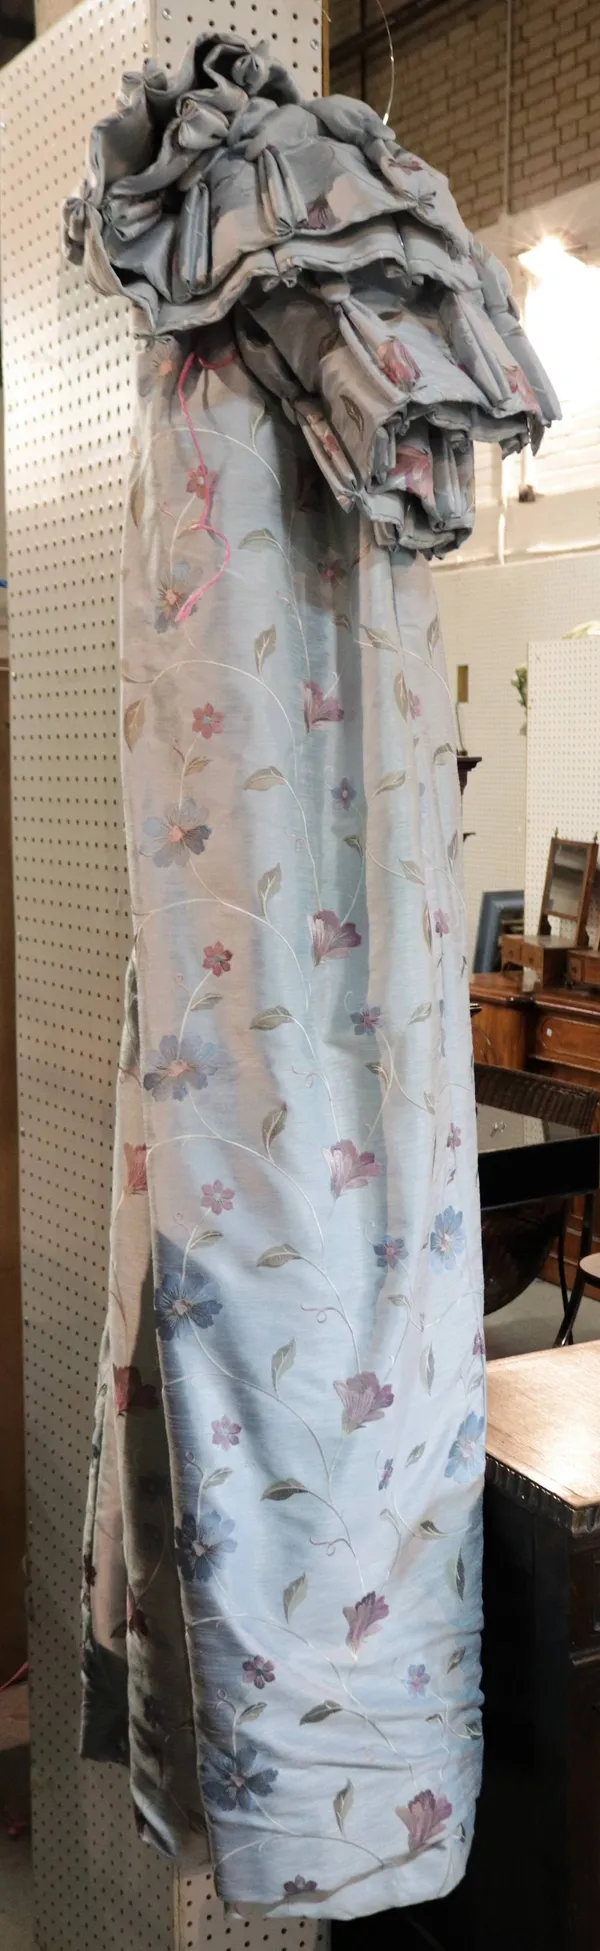 A pair of blue lined and interlined curtains with embroided flower decoration